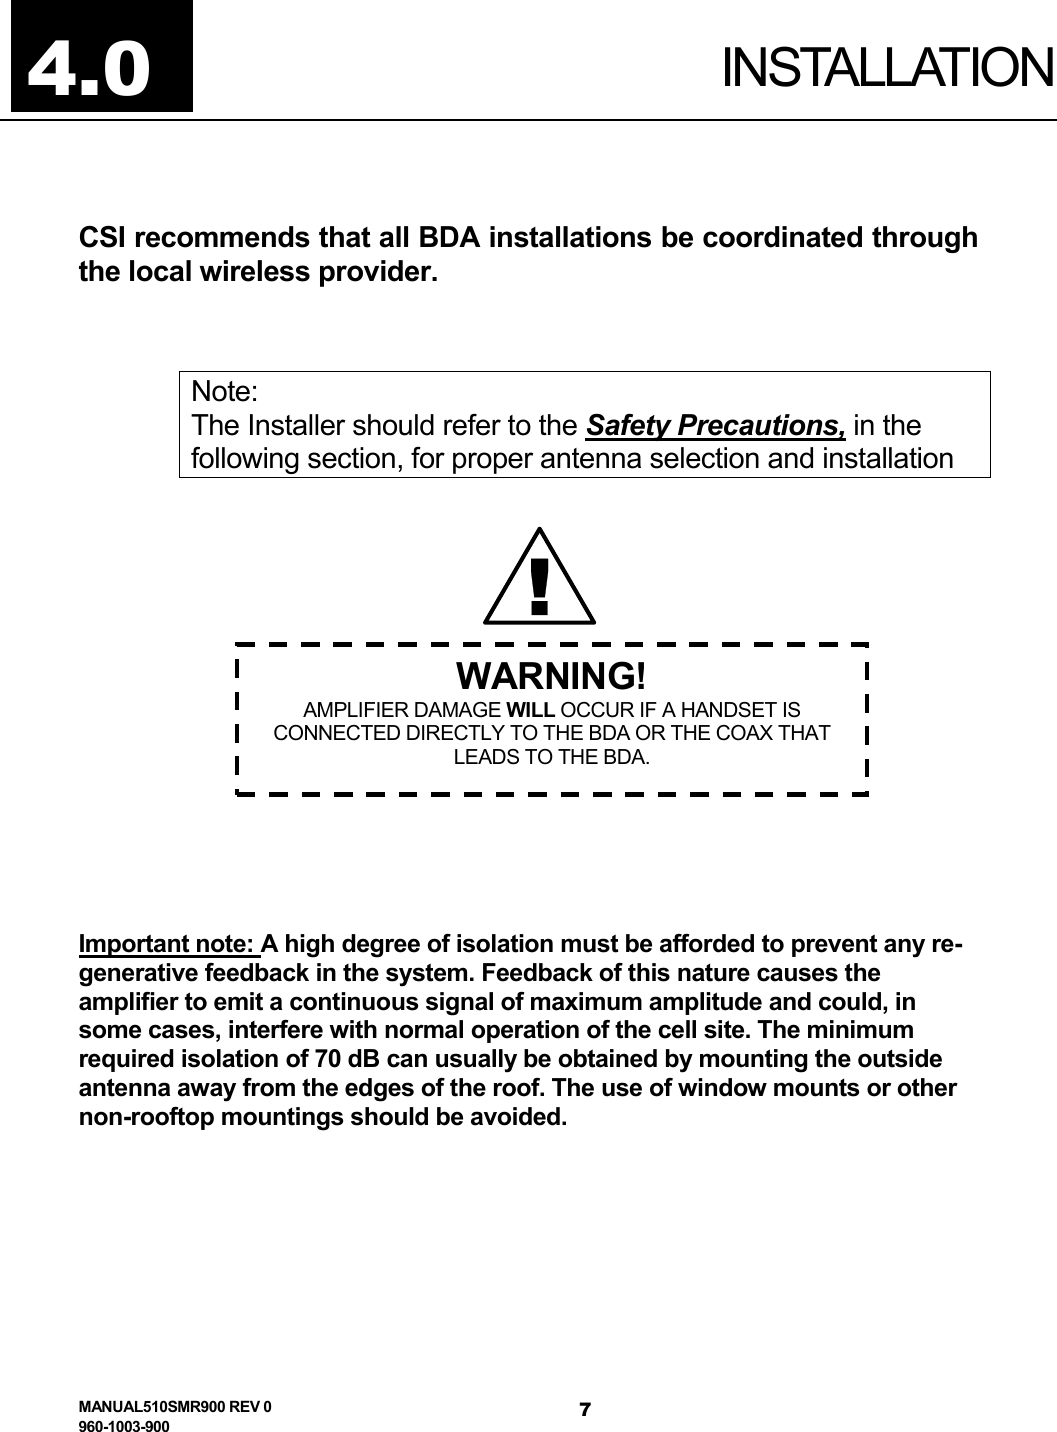  MANUAL510SMR900 REV 0 960-1003-900 7INSTALLATION CSI recommends that all BDA installations be coordinated through the local wireless provider.  Note: The Installer should refer to the Safety Precautions, in the following section, for proper antenna selection and installation             Important note: A high degree of isolation must be afforded to prevent any re-generative feedback in the system. Feedback of this nature causes the amplifier to emit a continuous signal of maximum amplitude and could, in some cases, interfere with normal operation of the cell site. The minimum required isolation of 70 dB can usually be obtained by mounting the outside antenna away from the edges of the roof. The use of window mounts or other non-rooftop mountings should be avoided.   !WARNING! AMPLIFIER DAMAGE WILL OCCUR IF A HANDSET IS CONNECTED DIRECTLY TO THE BDA OR THE COAX THAT LEADS TO THE BDA. 4.0 